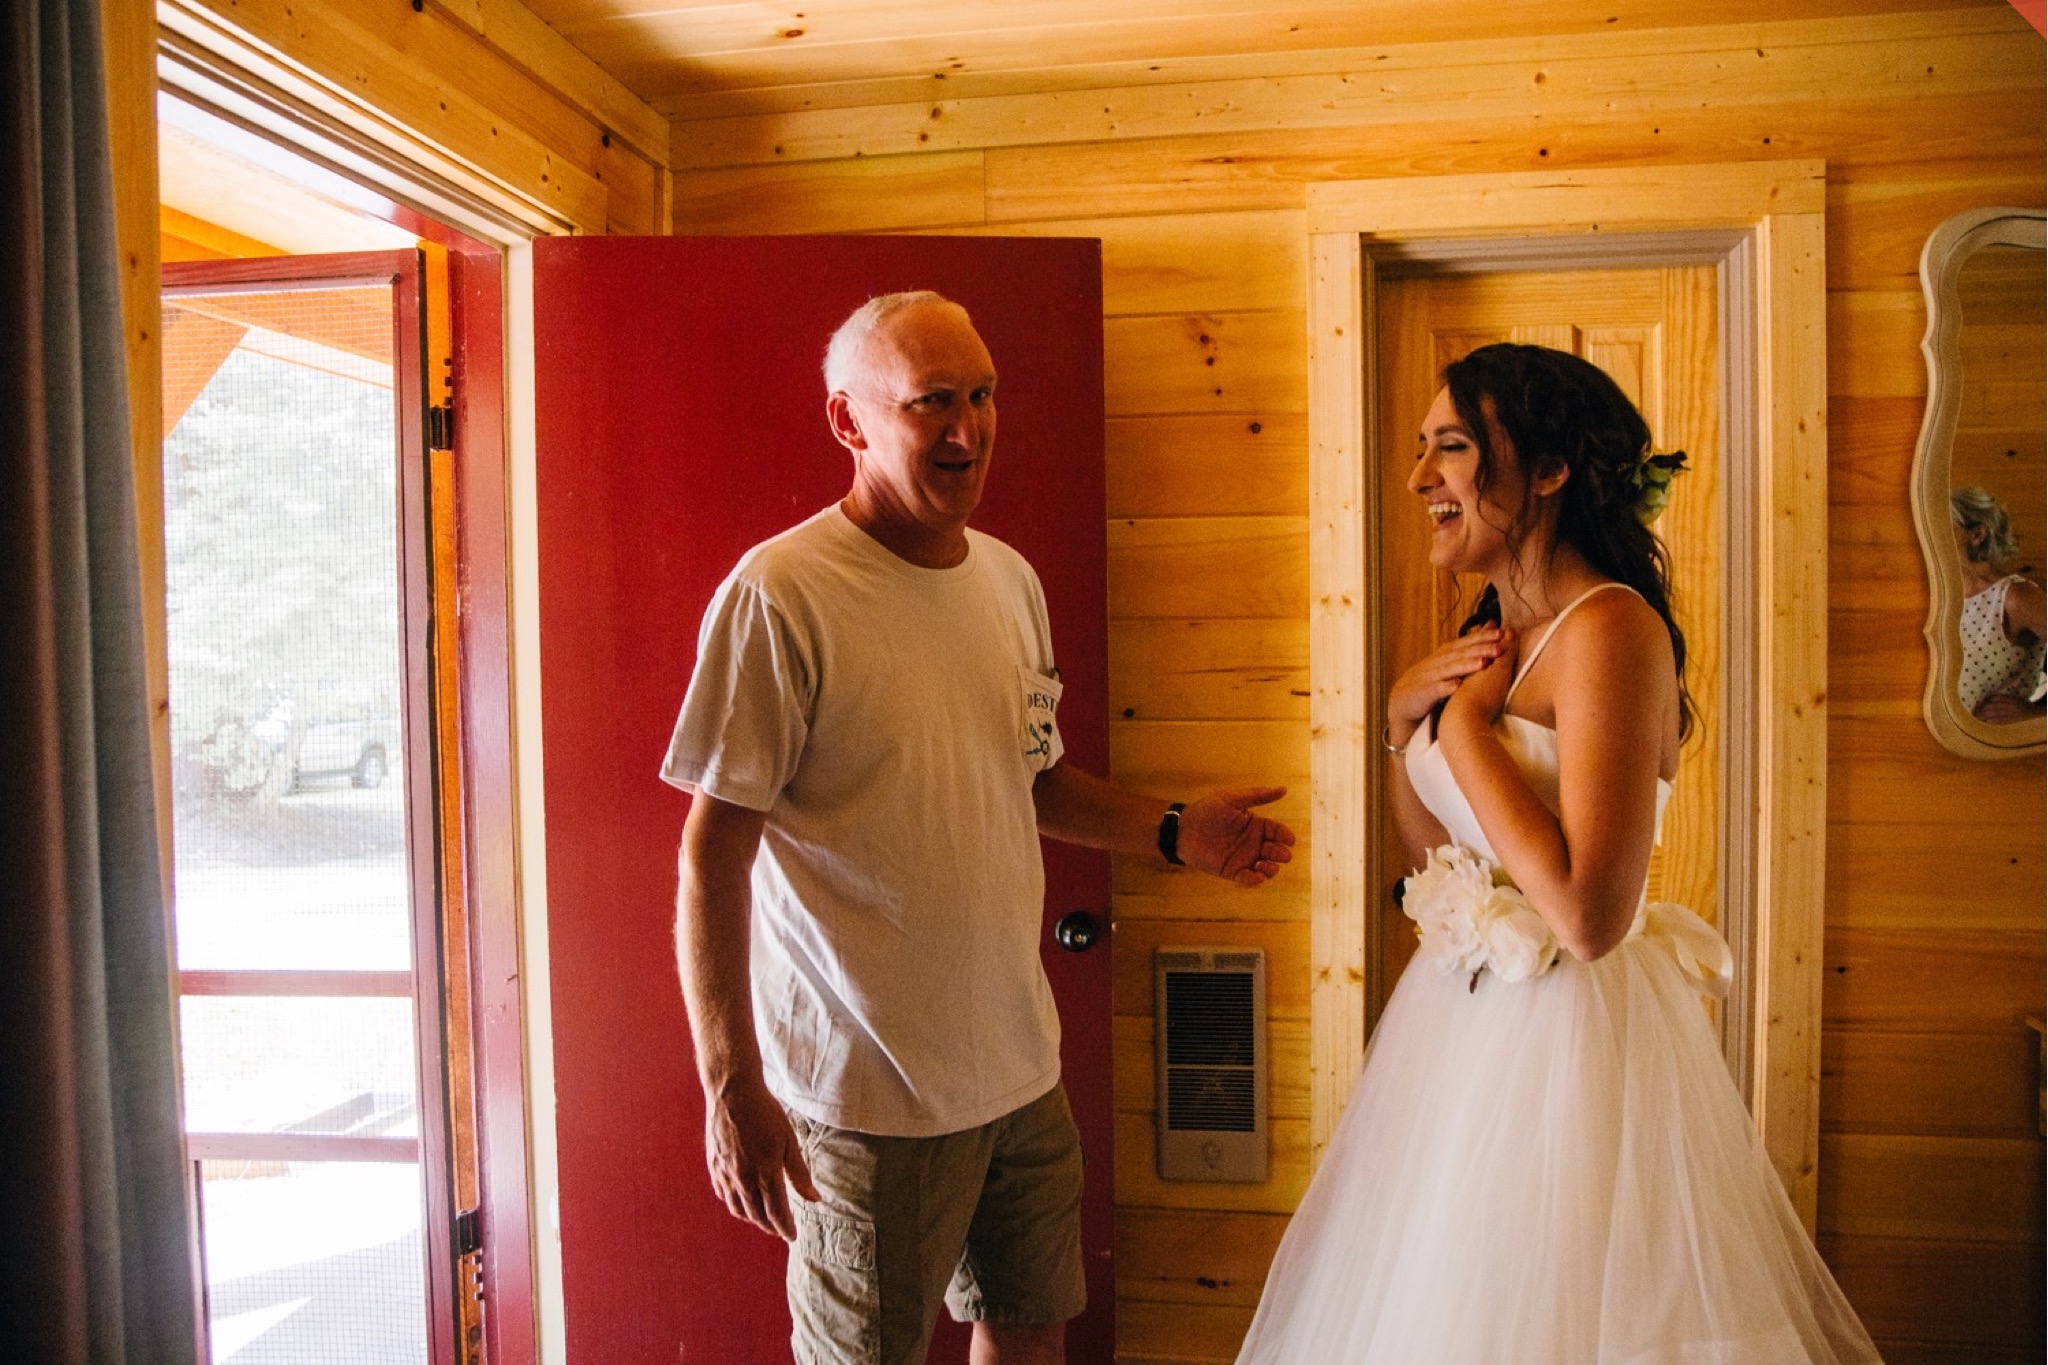 The bride laughs and she sees her father for the first time on her wedding day.